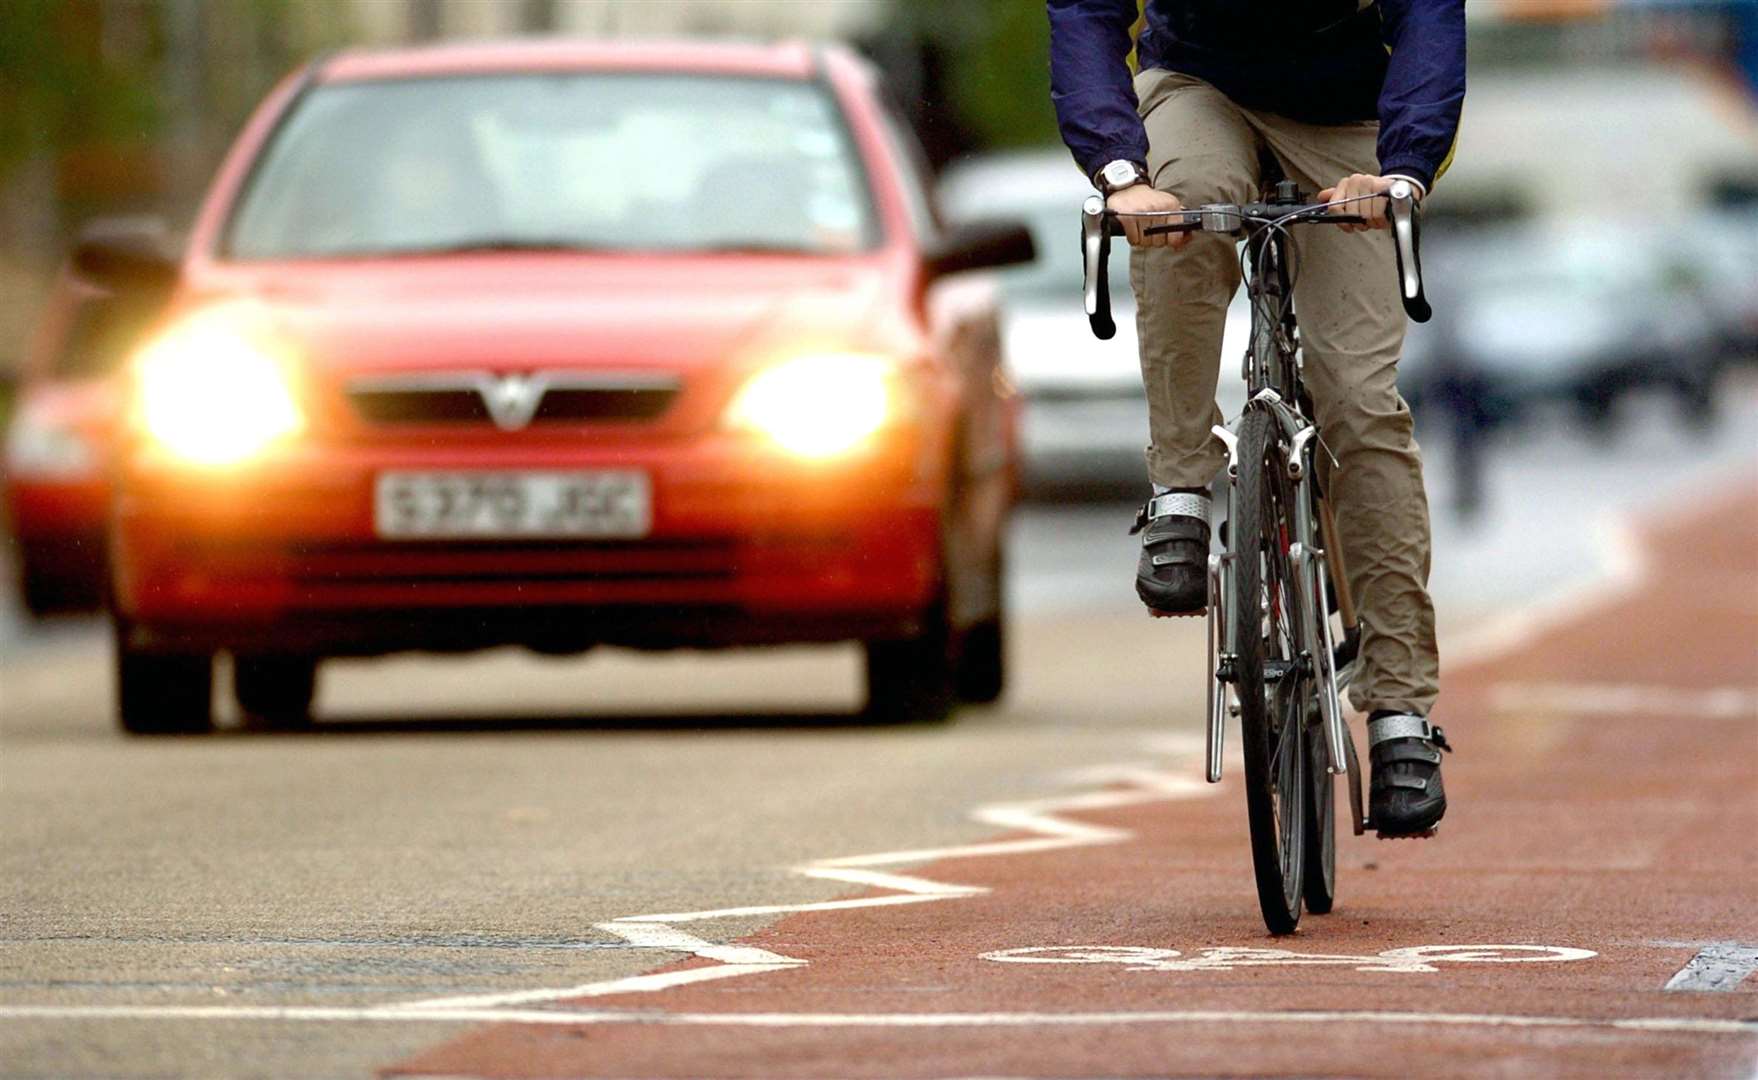 In January there were big changes made to the Highway Code. Image: iStock/PA/Chris Radburn.